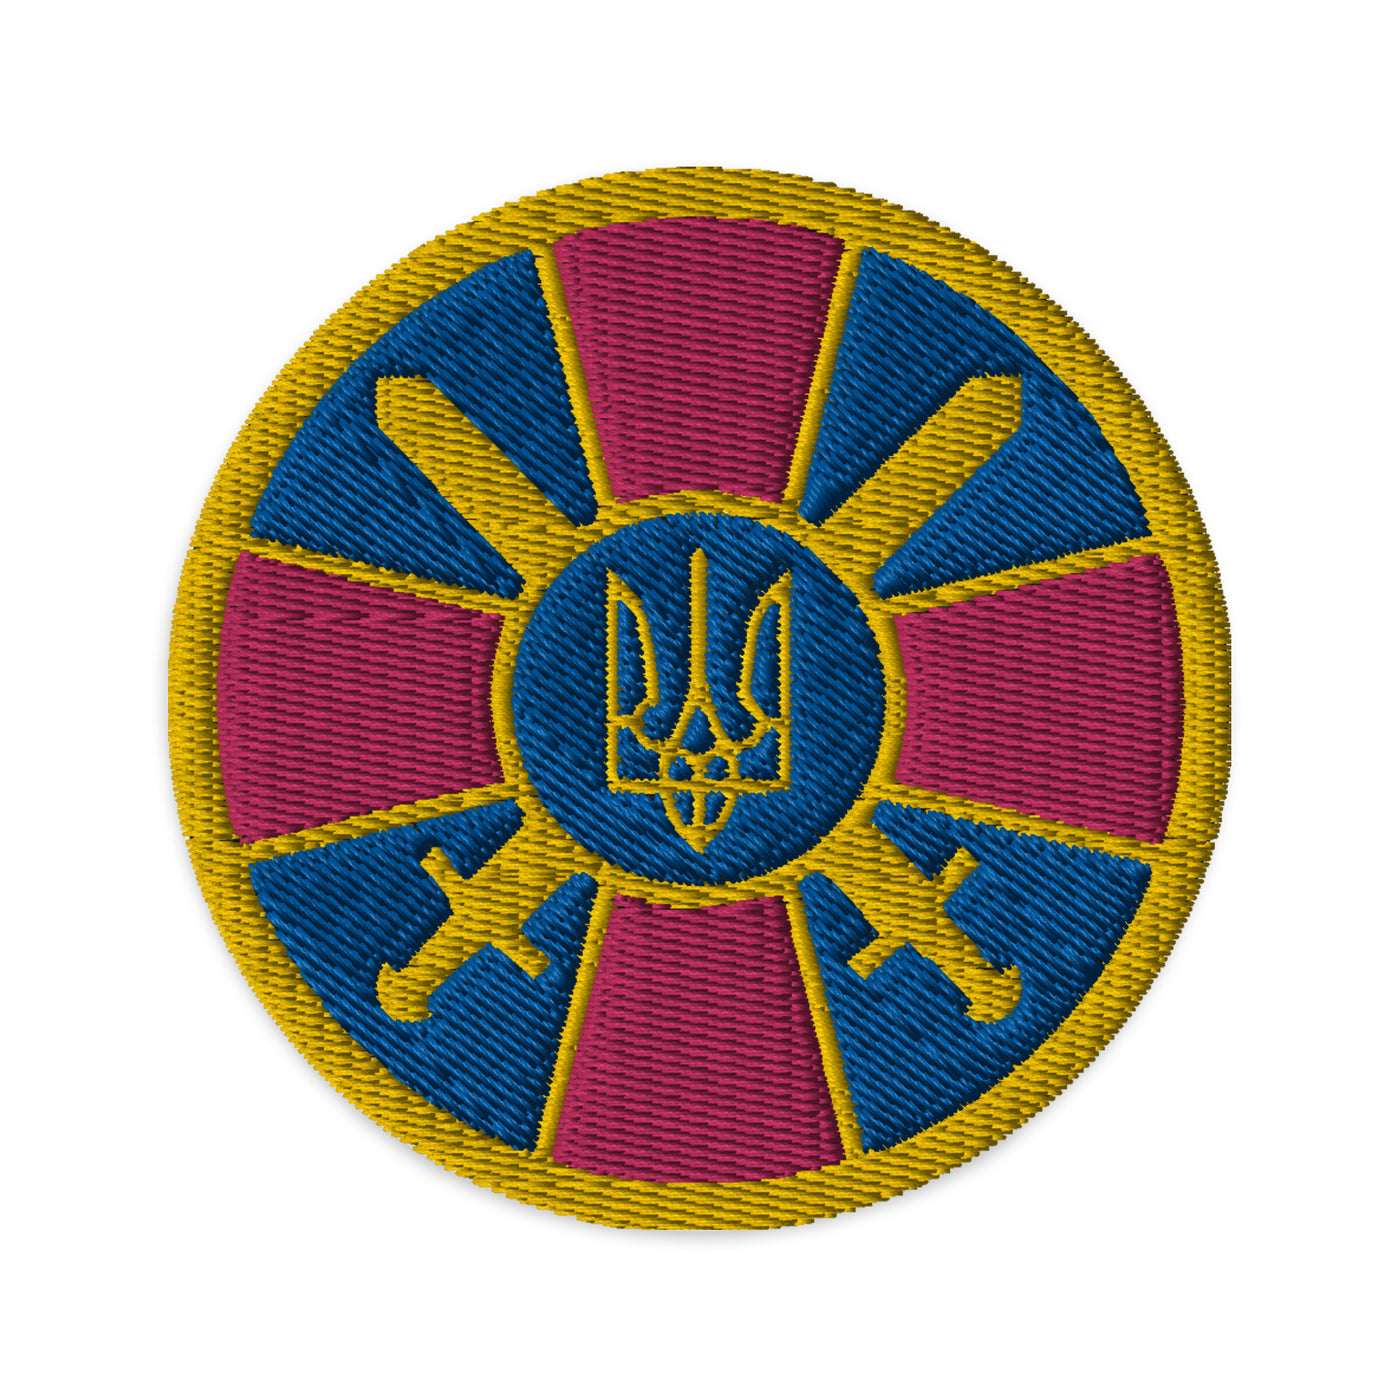 Ukrainian Military Emblem 3 Colored Embroidered Patch